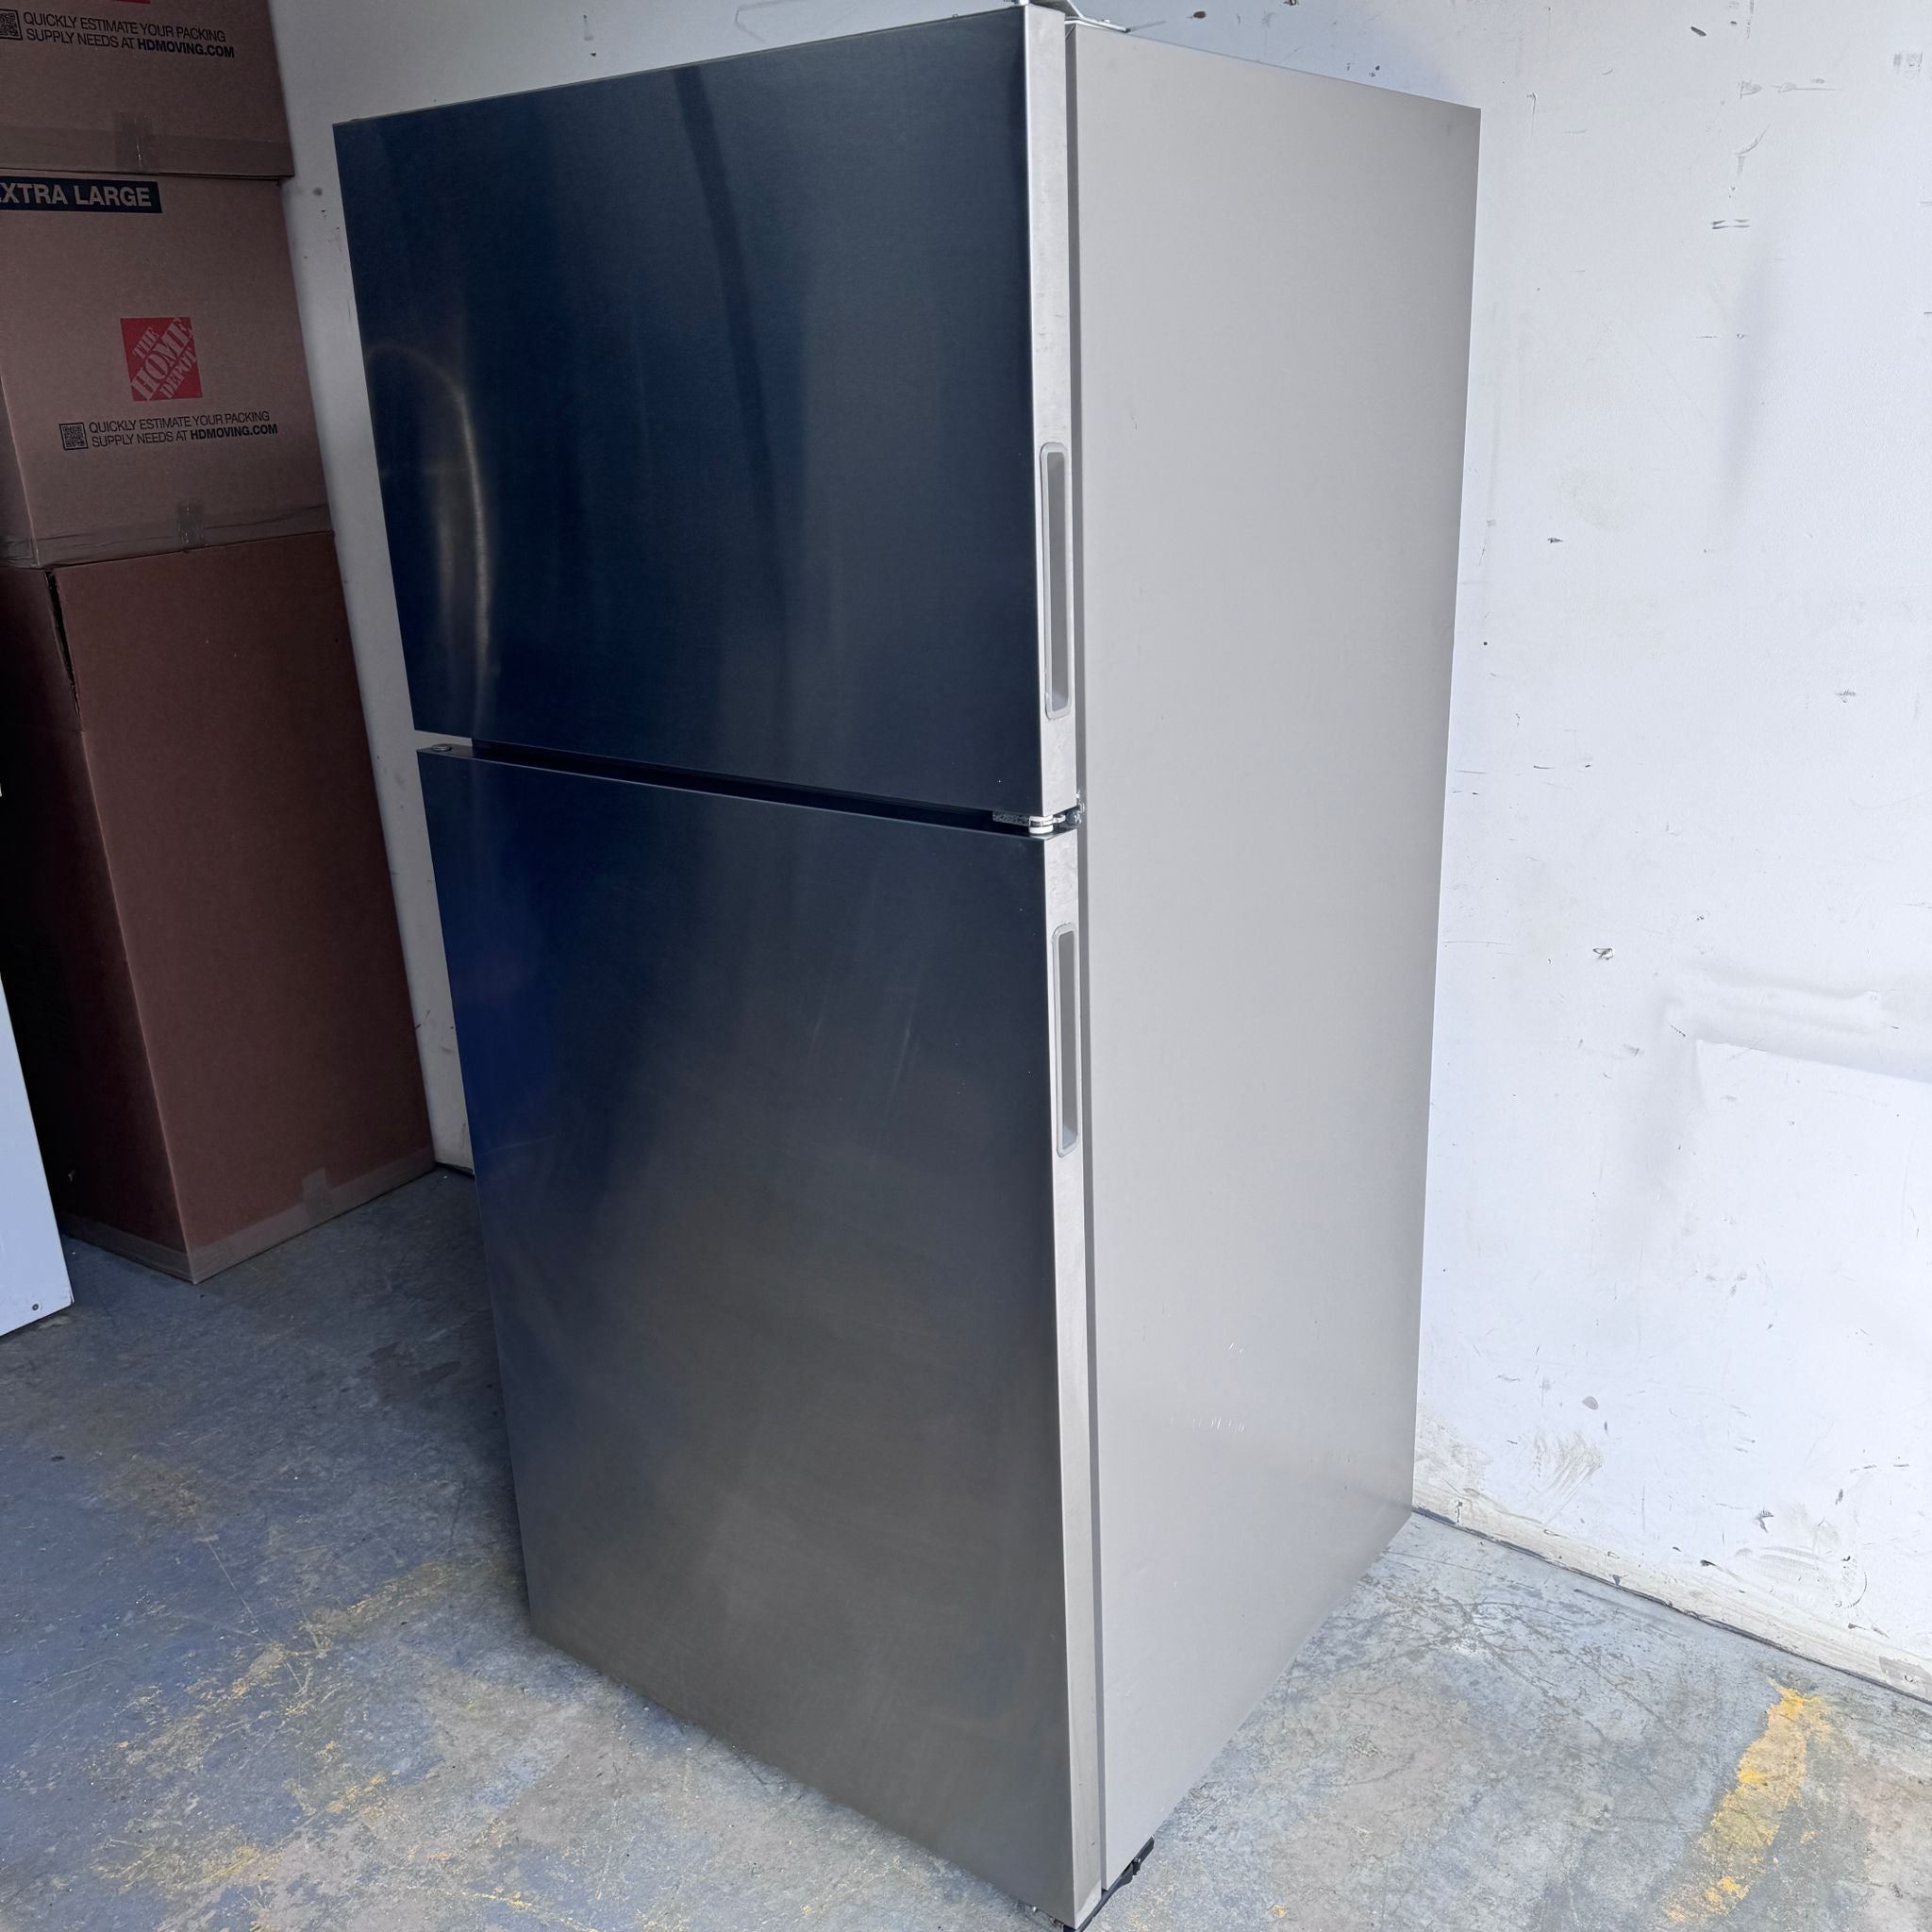 Whirlpool Stainless Steel Top and Bottom Refrigerator